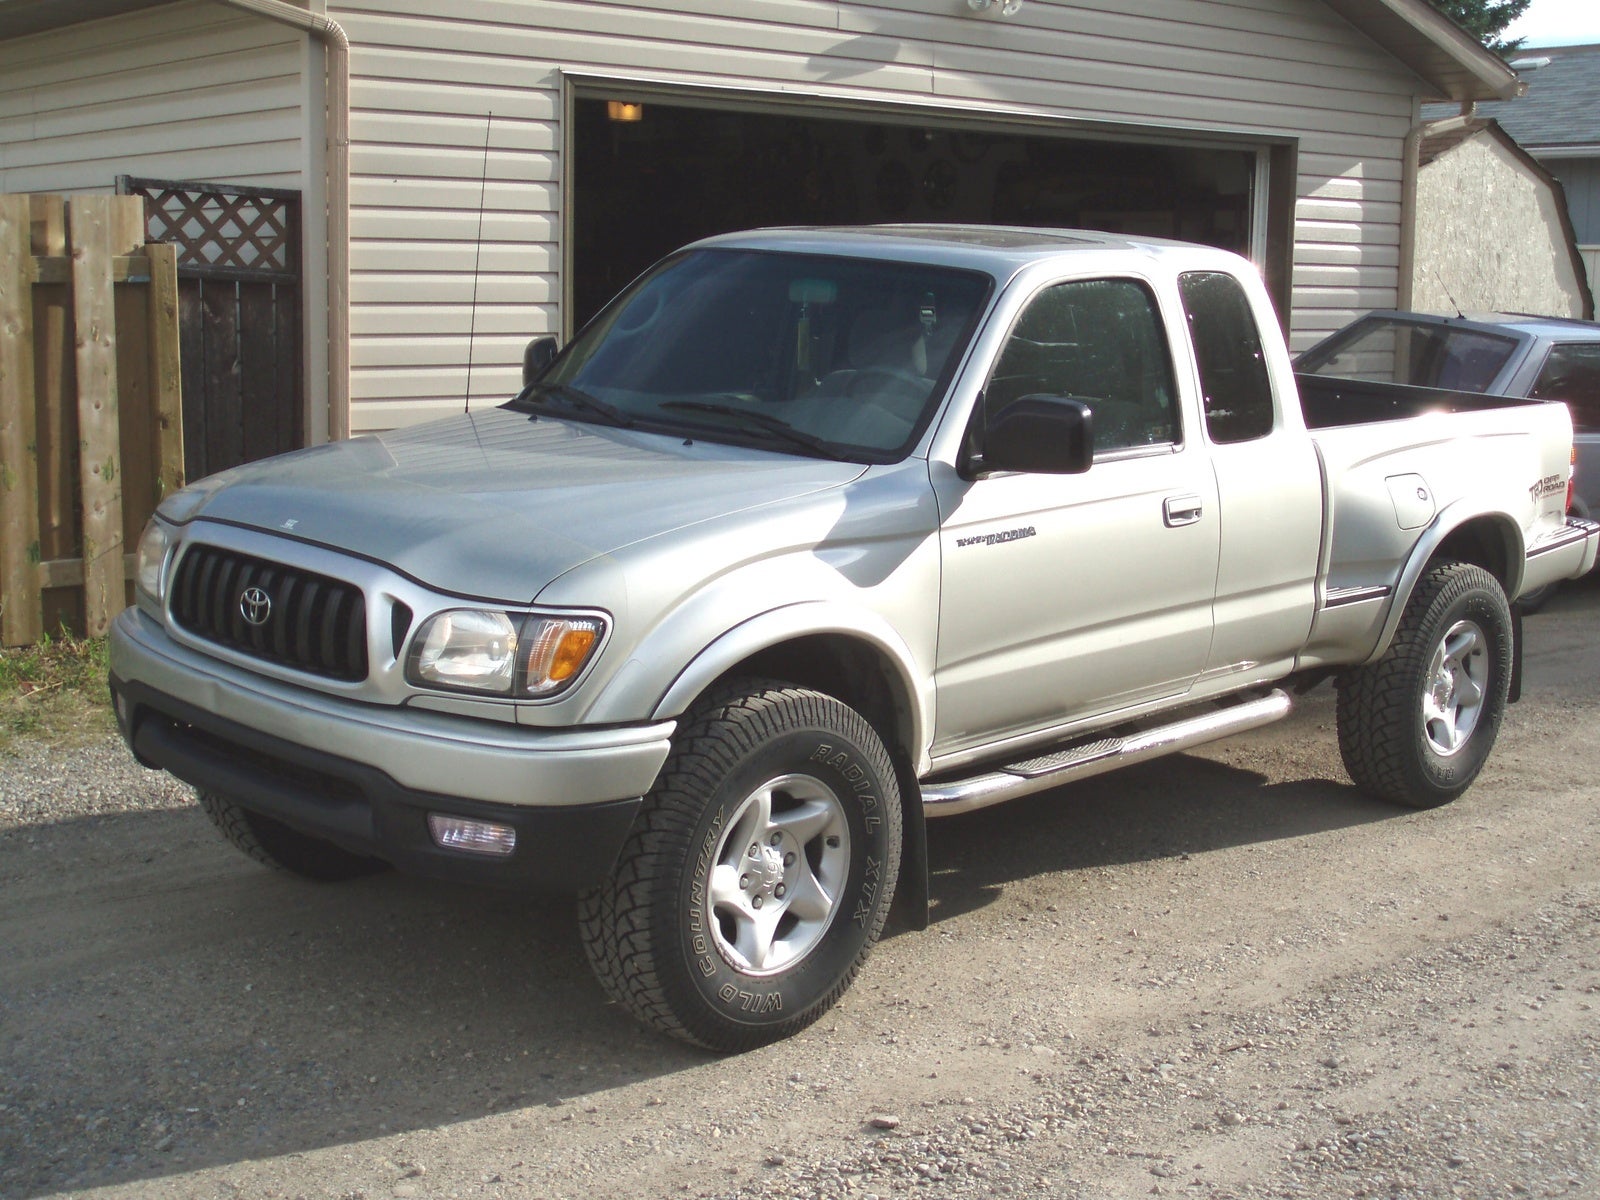 2003 toyota tacoma extended cab blue book #6